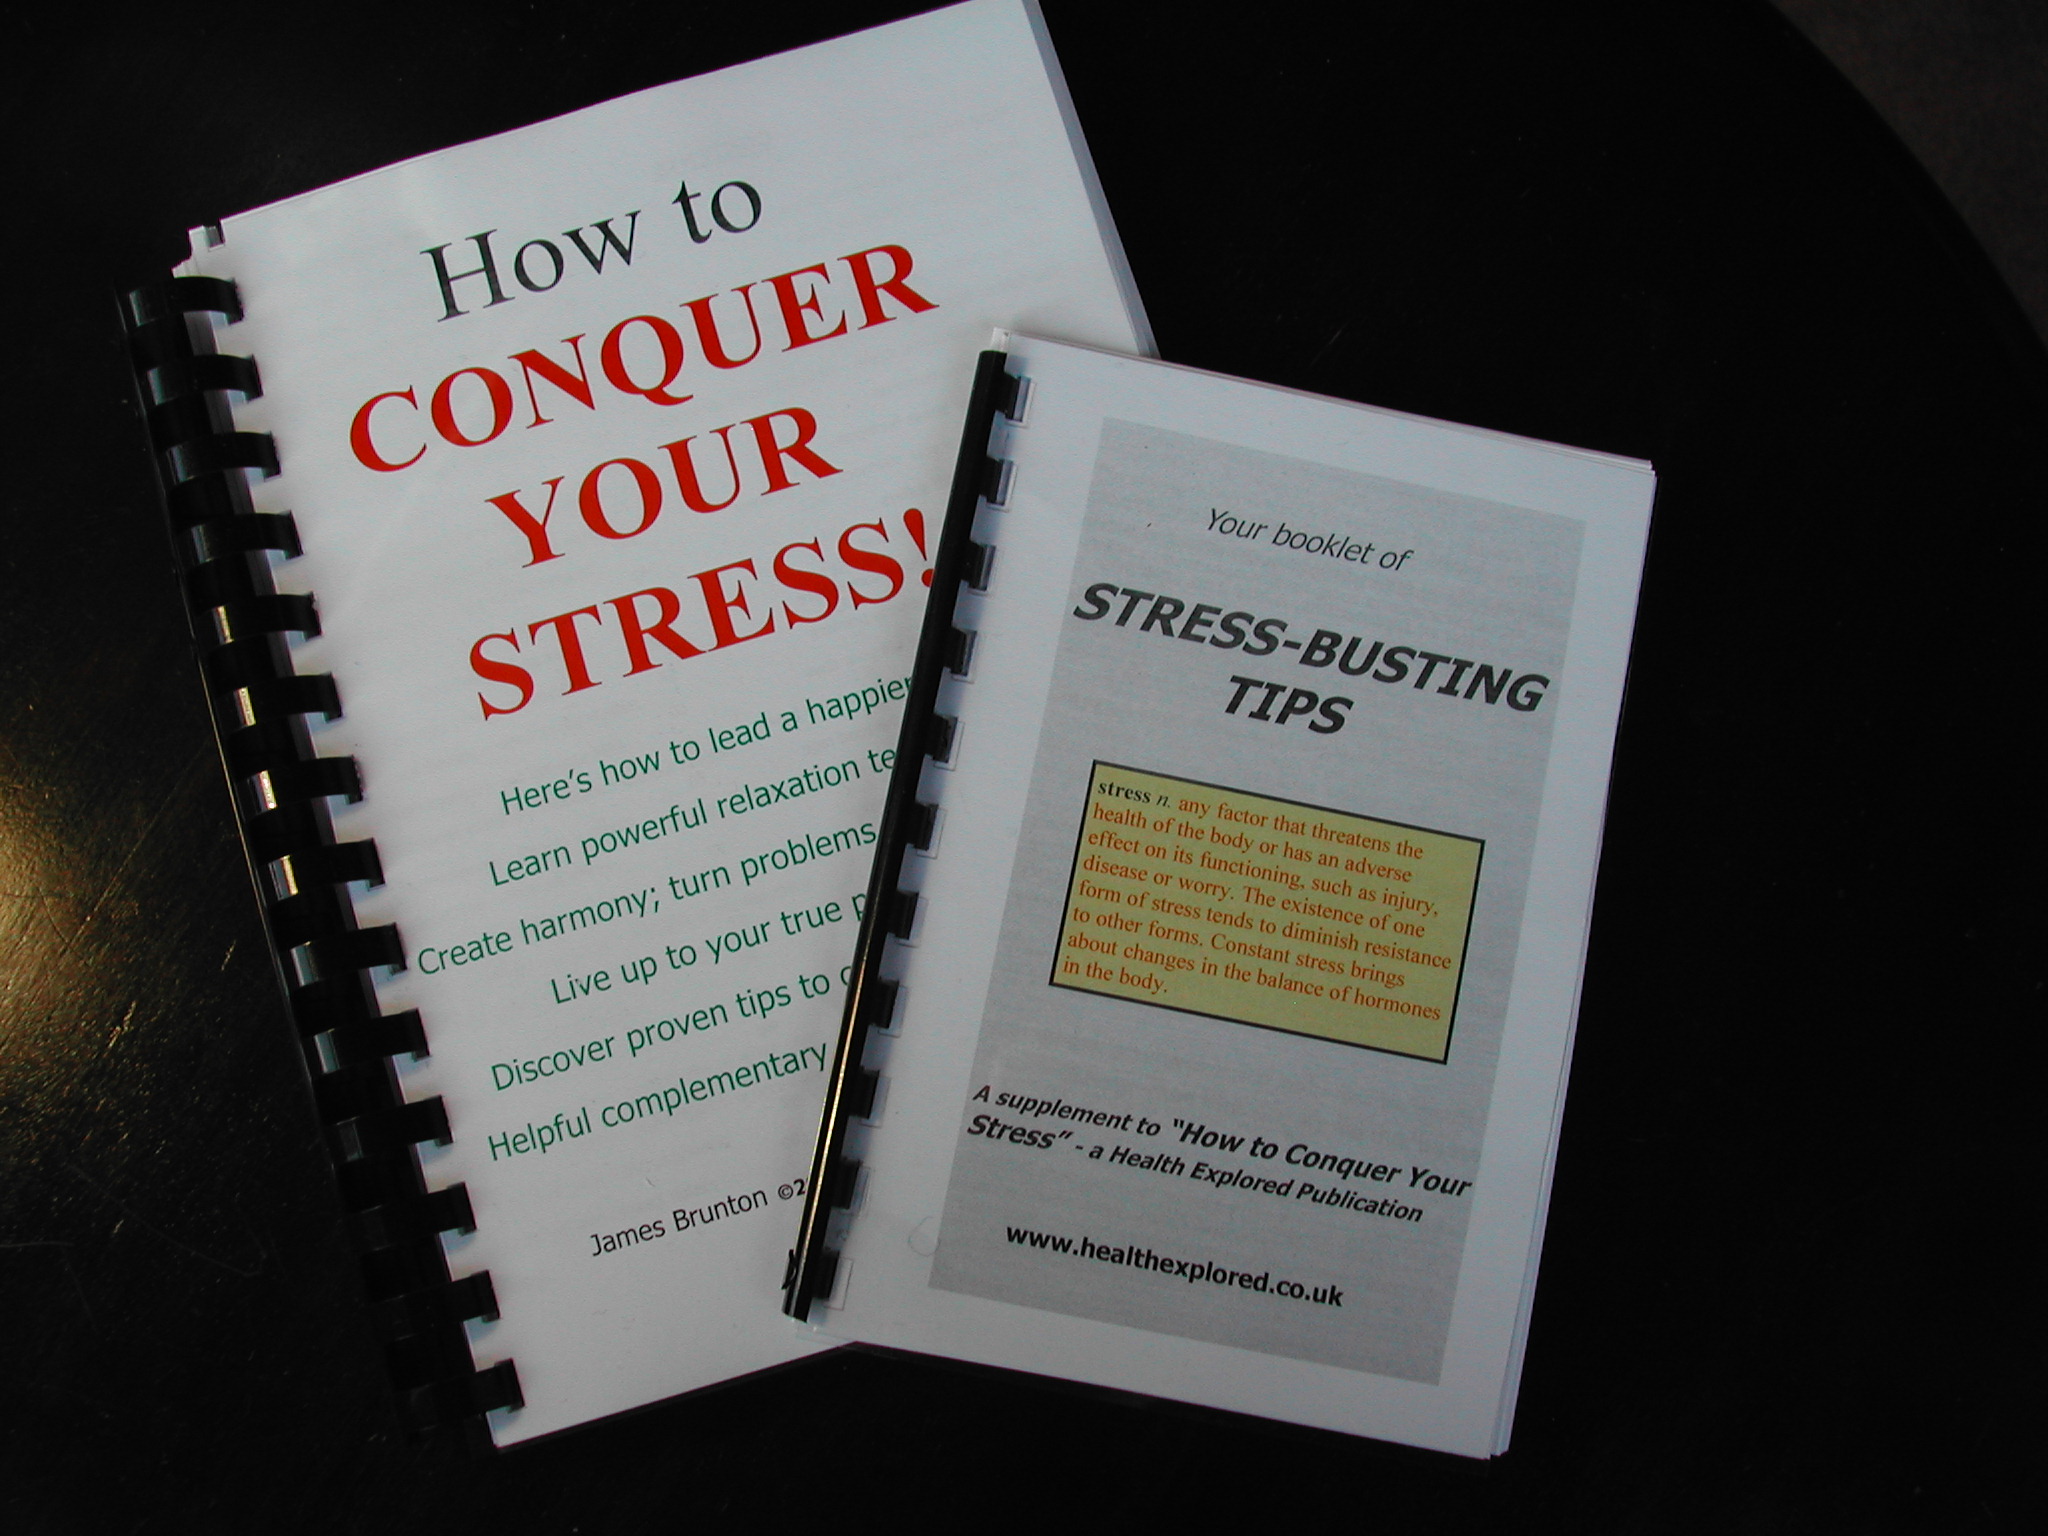 Control your stress with these tips